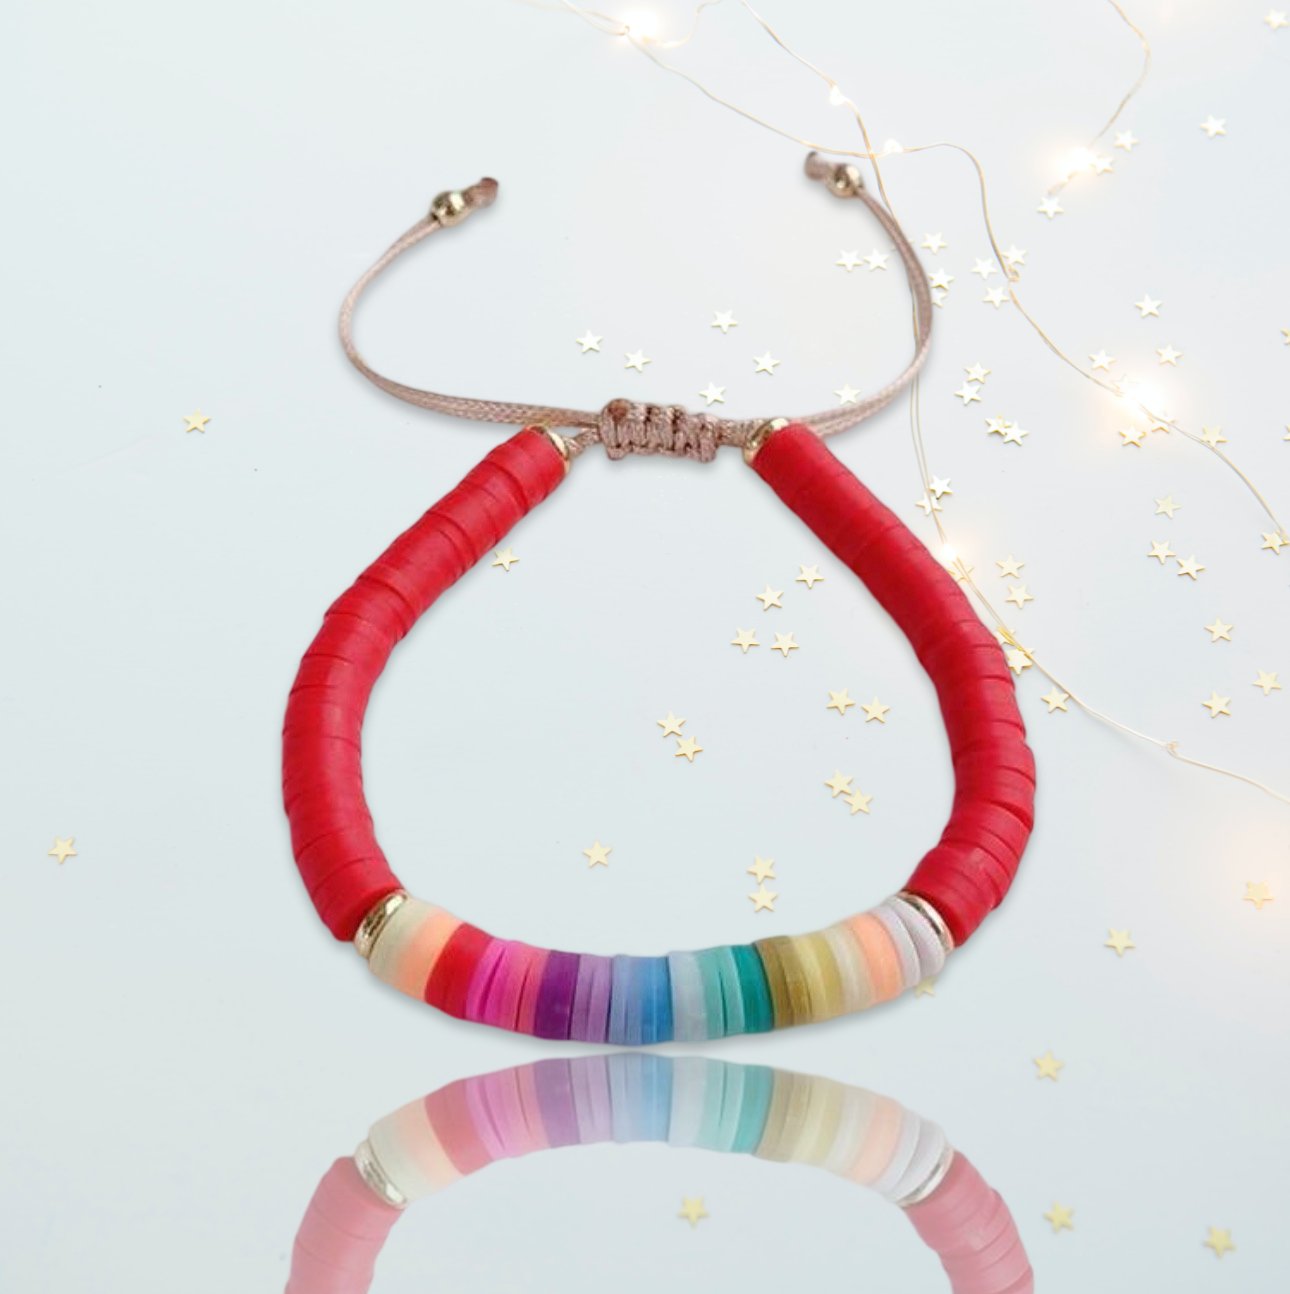 Affordable Accessories under 100 AED - Penelope Made This Inc.